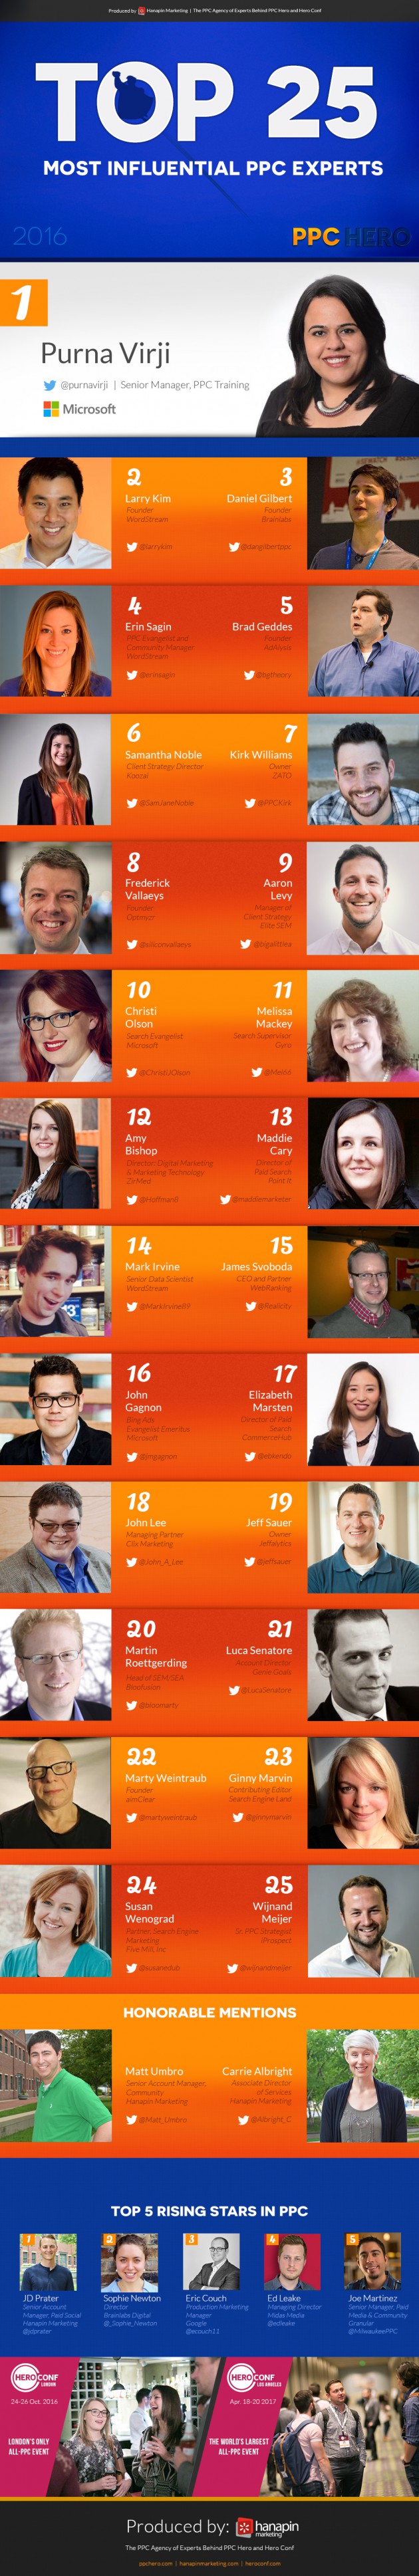 2016 Top 25 Most Influential PPC Experts